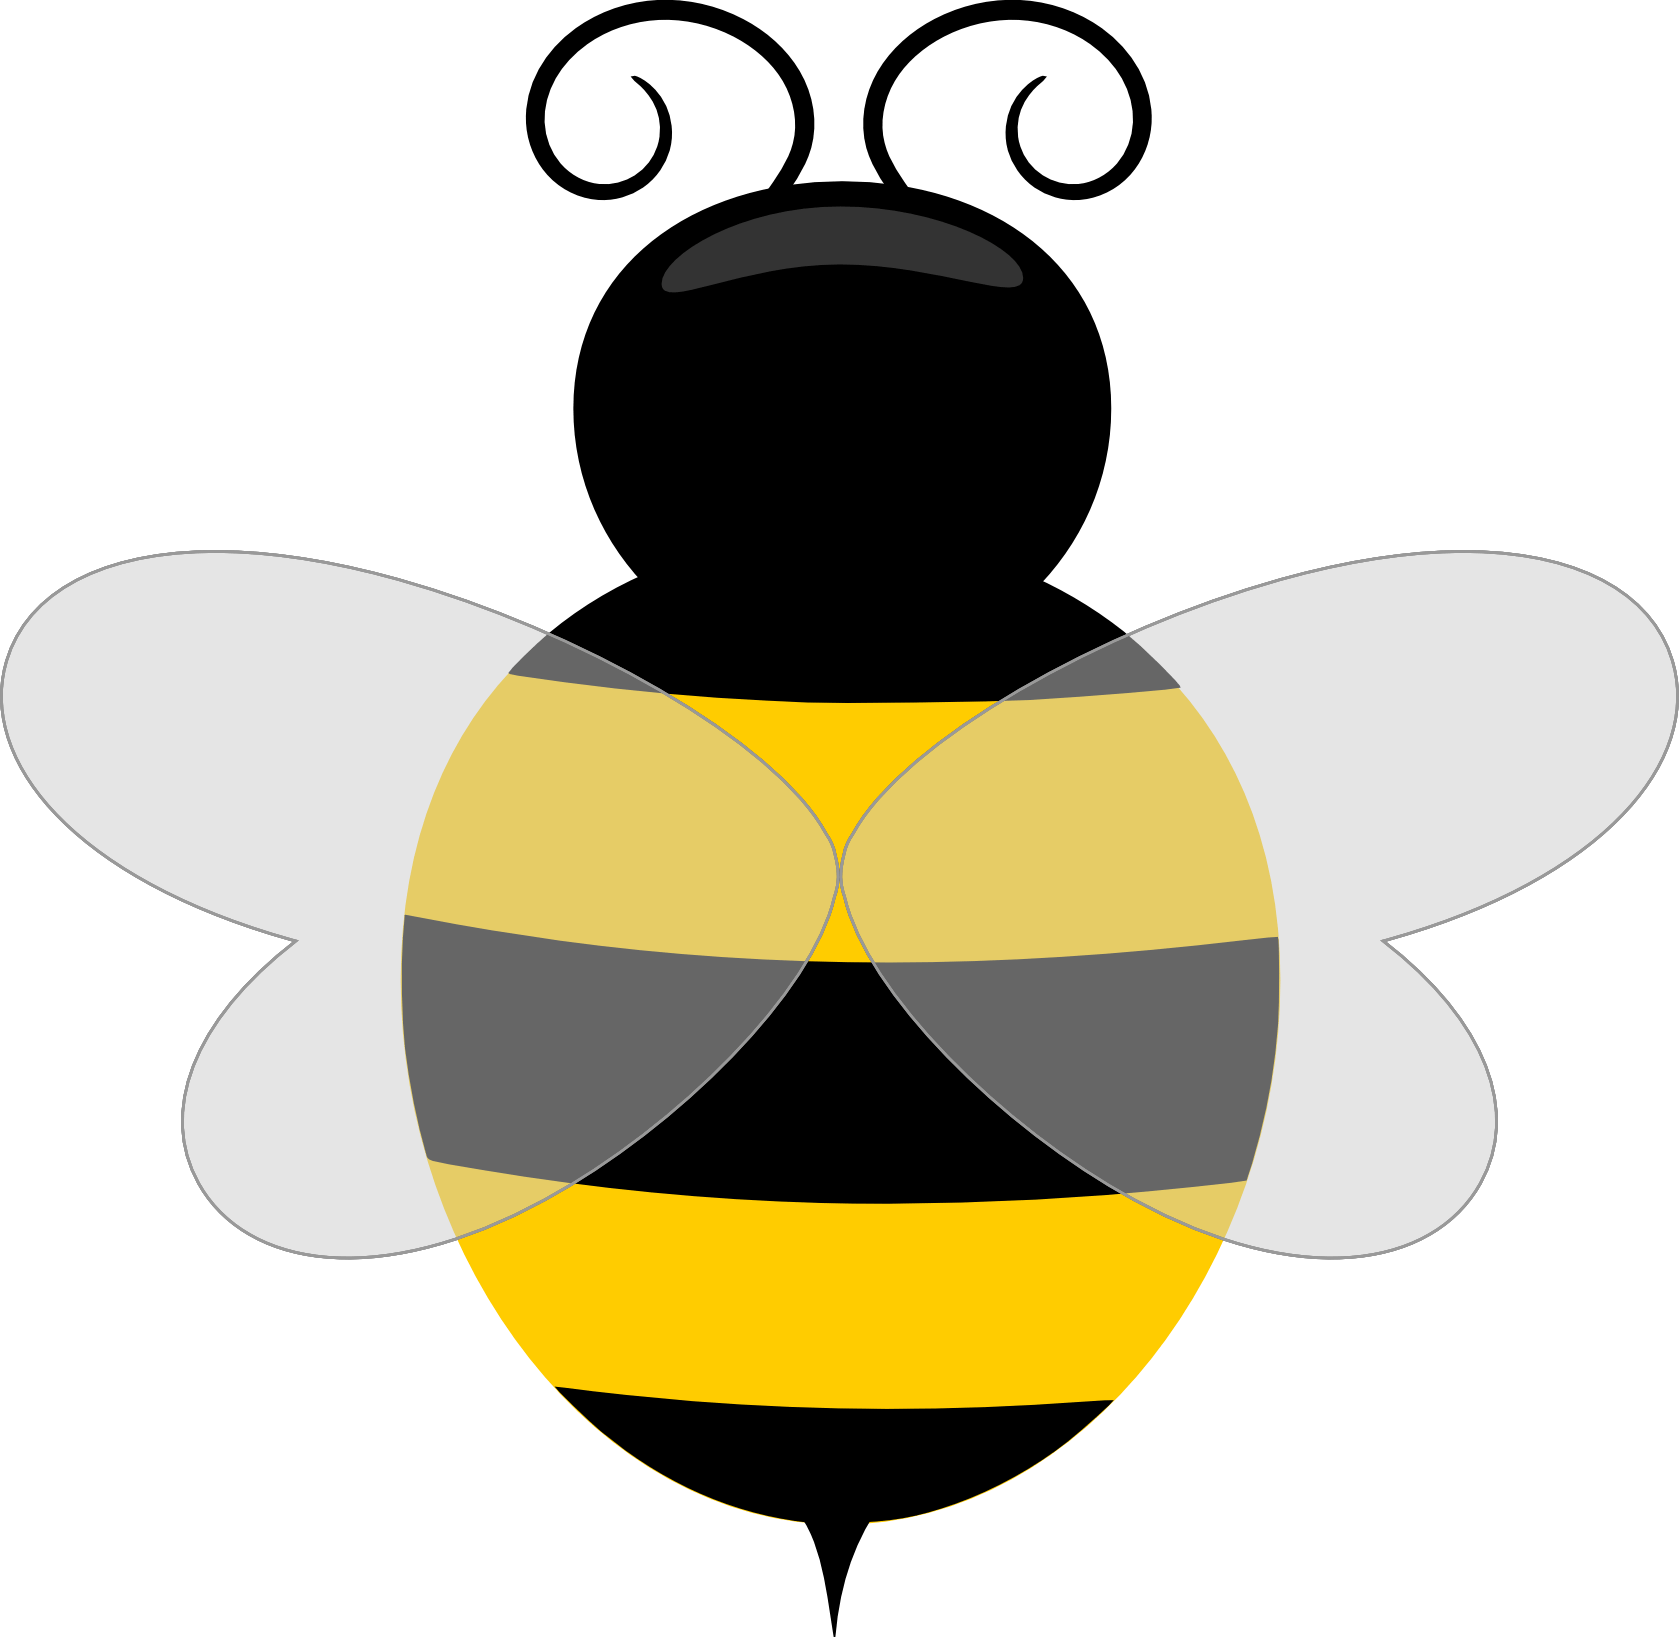 Bee image library library no background HUGE FREEBIE! Download